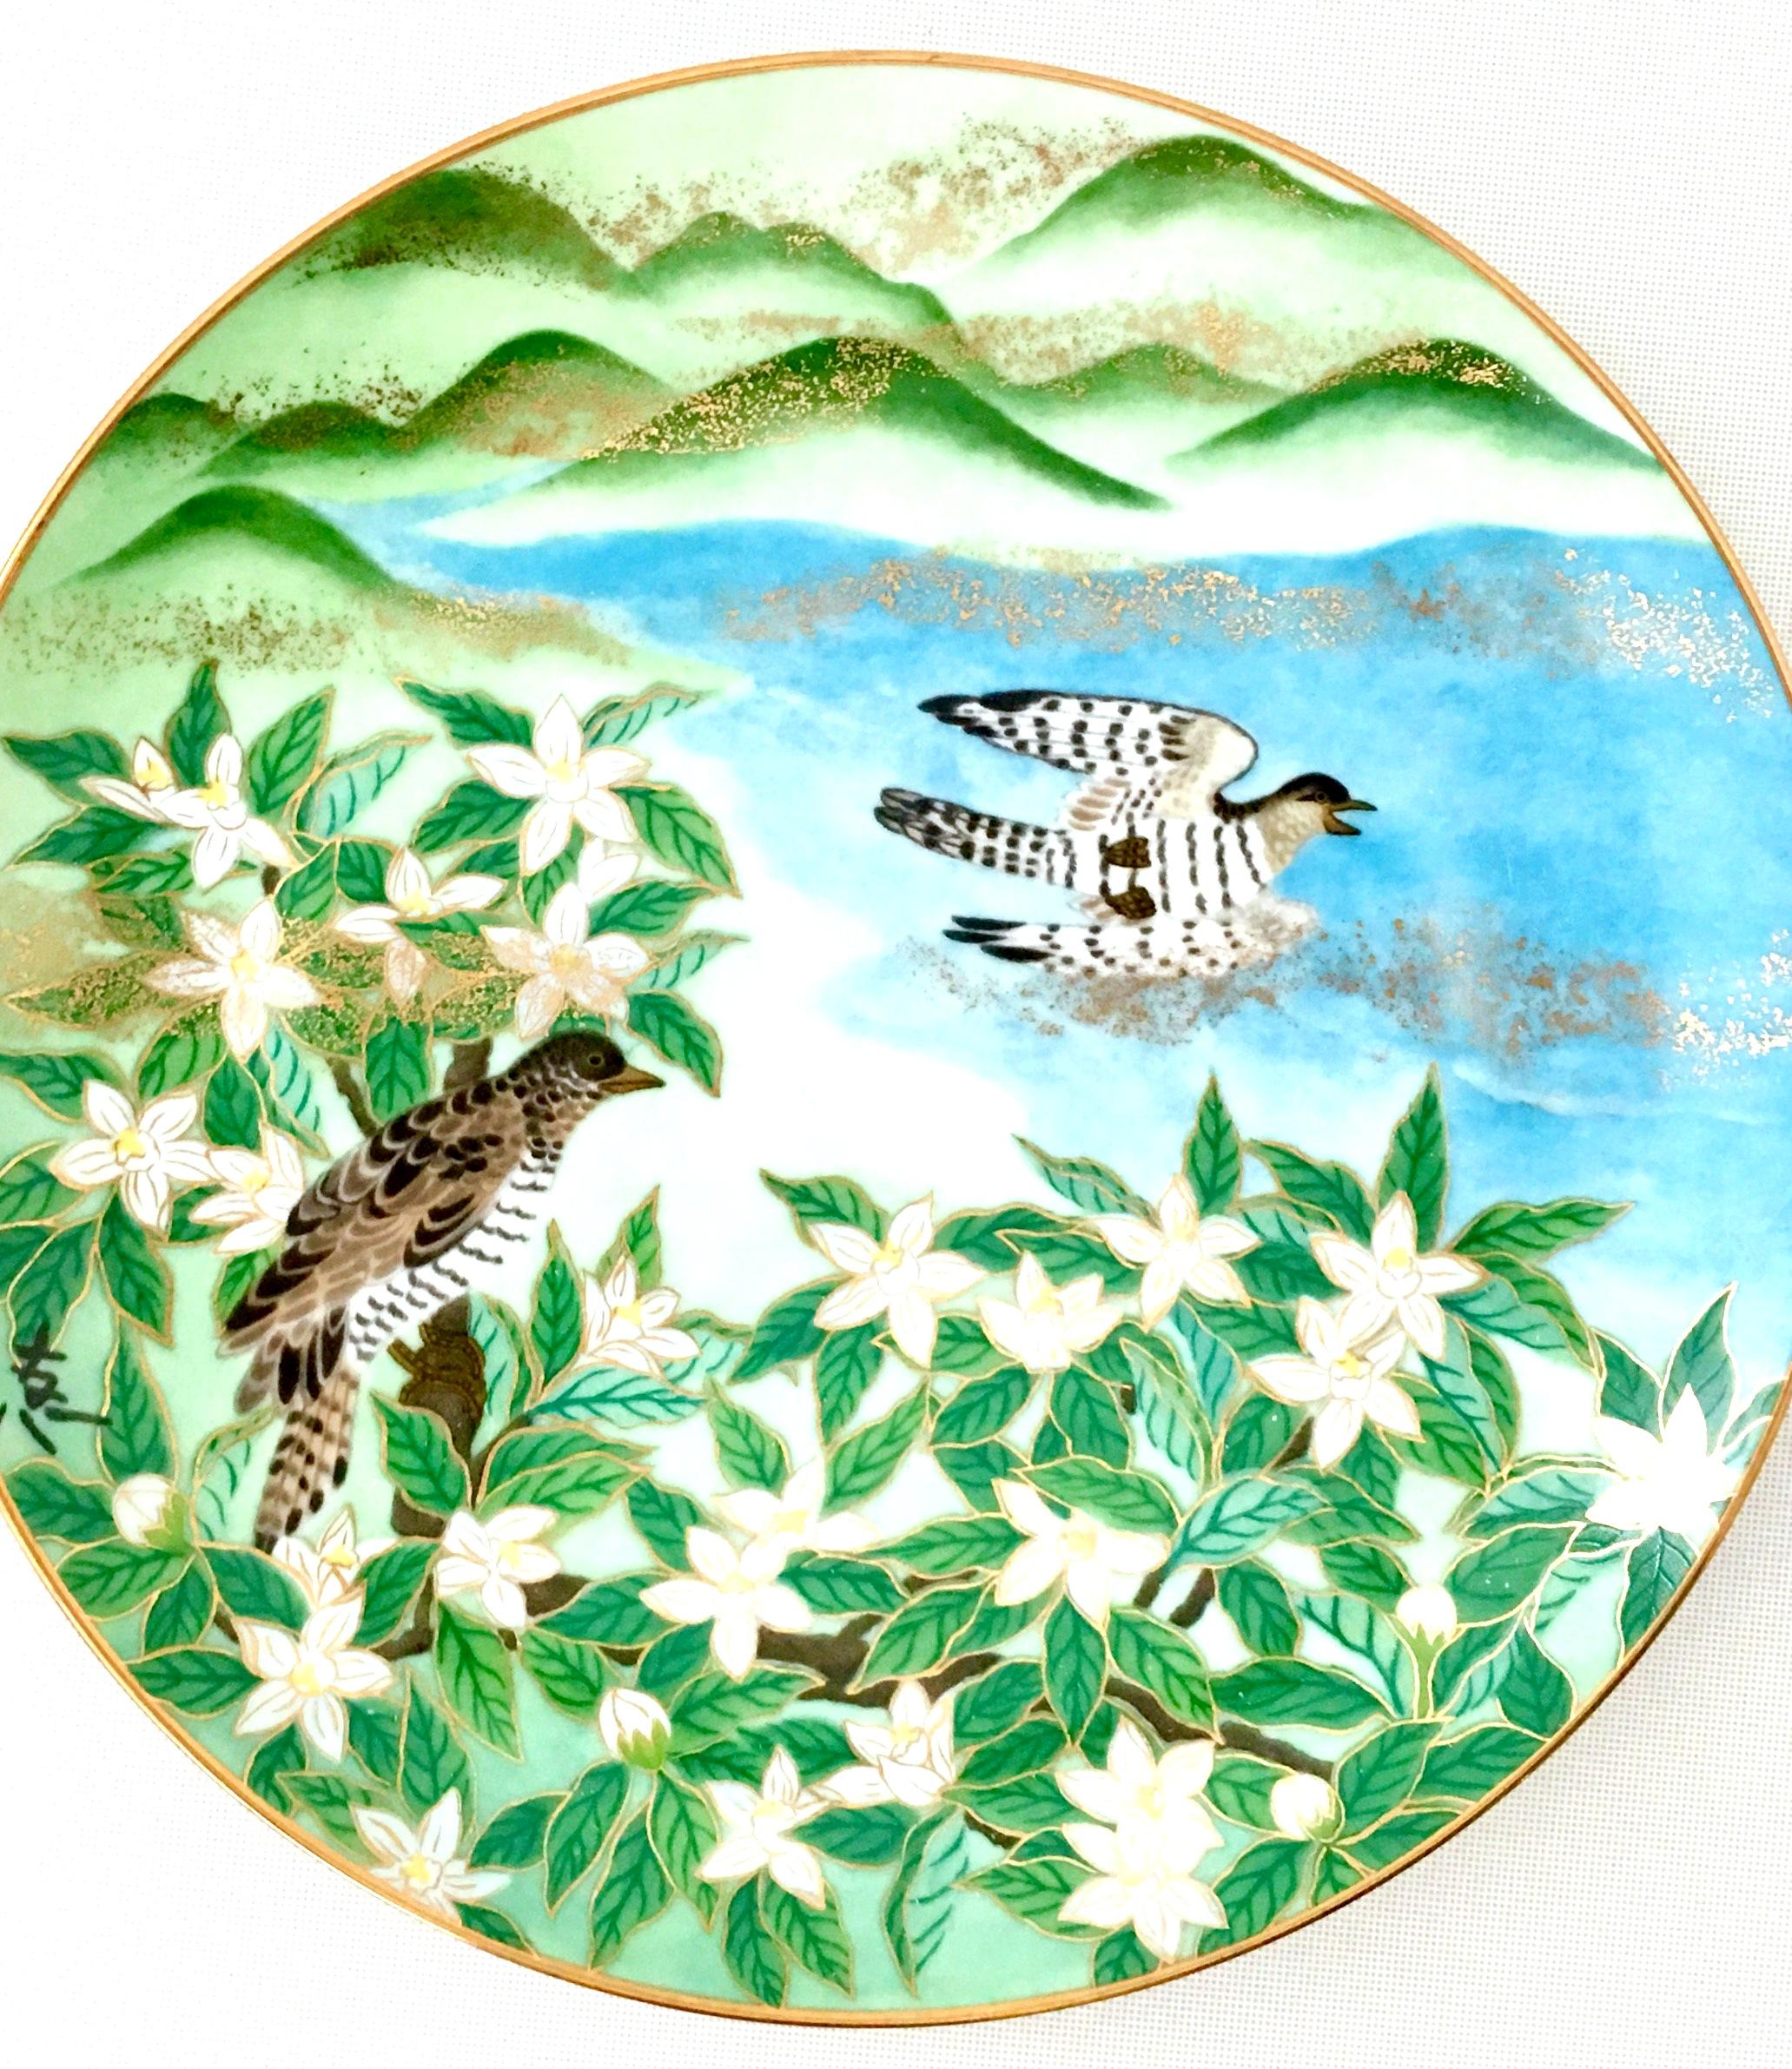 1986 Japanese Limited Edition Hand-Painted Porcelain Plates Set of 4 For Sale 1